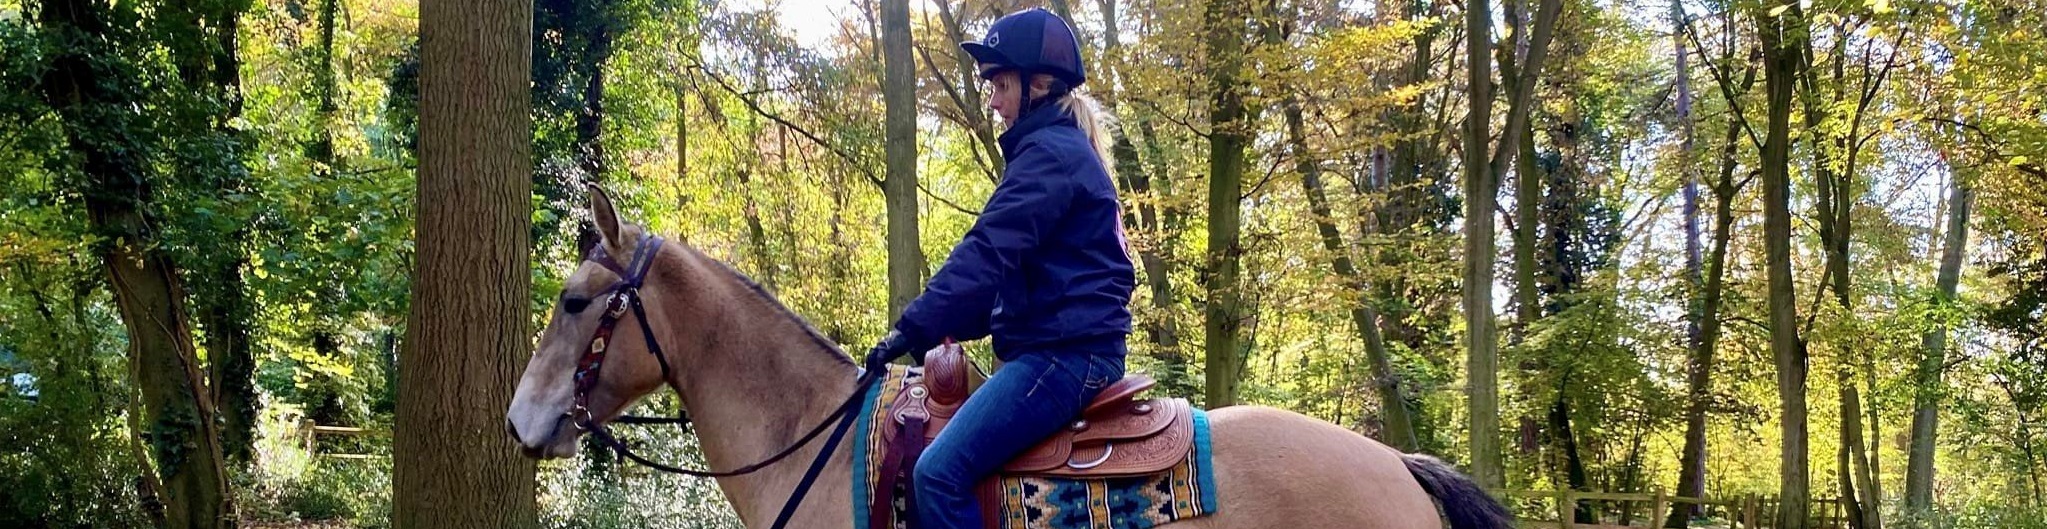 Christie’s blog – Rollercoasters are smoother than horse ownership! (part 1)